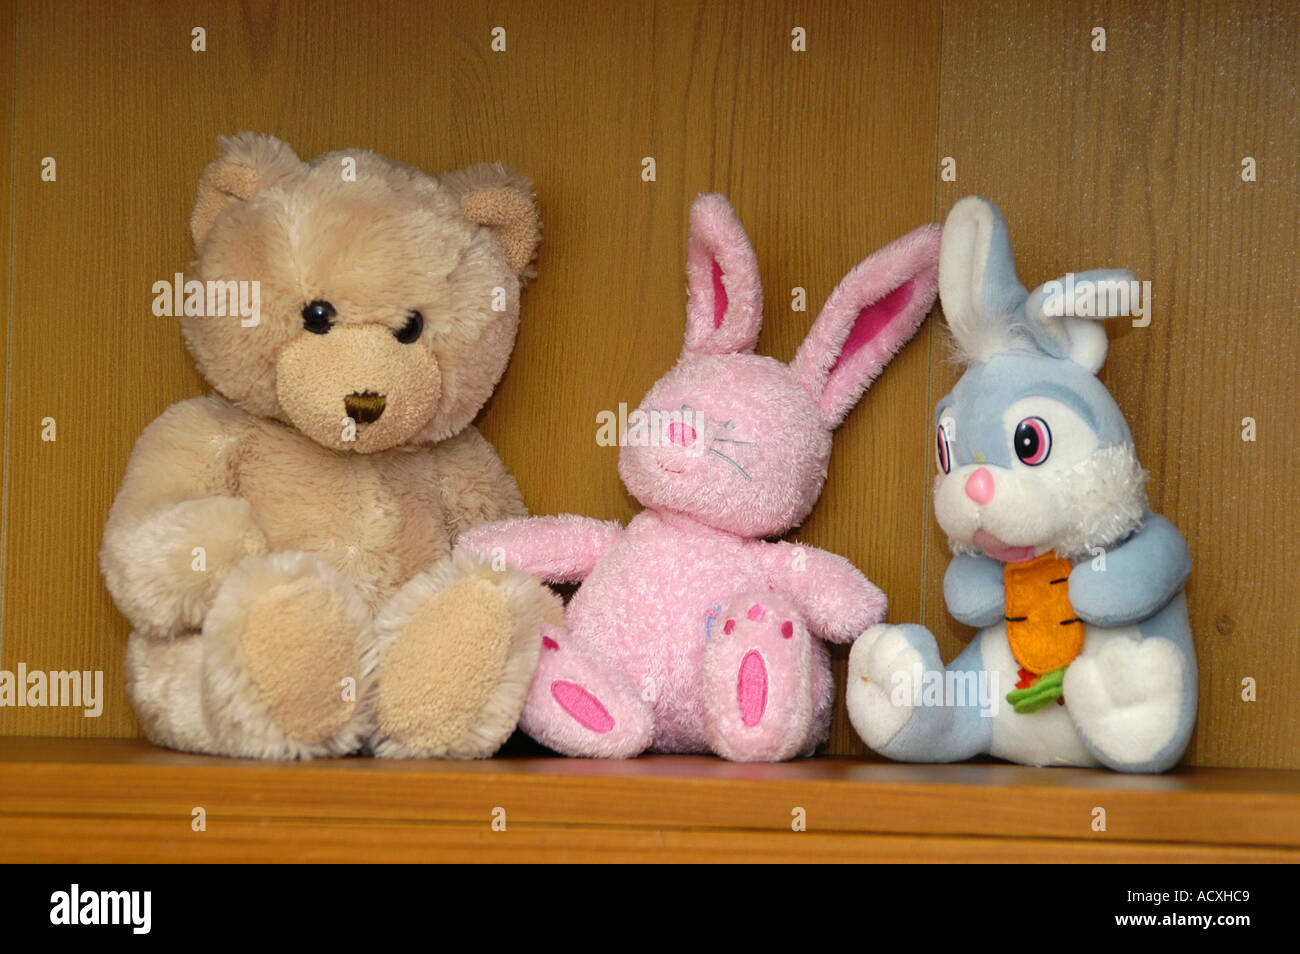 tree toys pink blue rabbit bunny bear brown shelf animal stuffed figure soft  toy cuddly looking children character plaything gam Stock Photo - Alamy